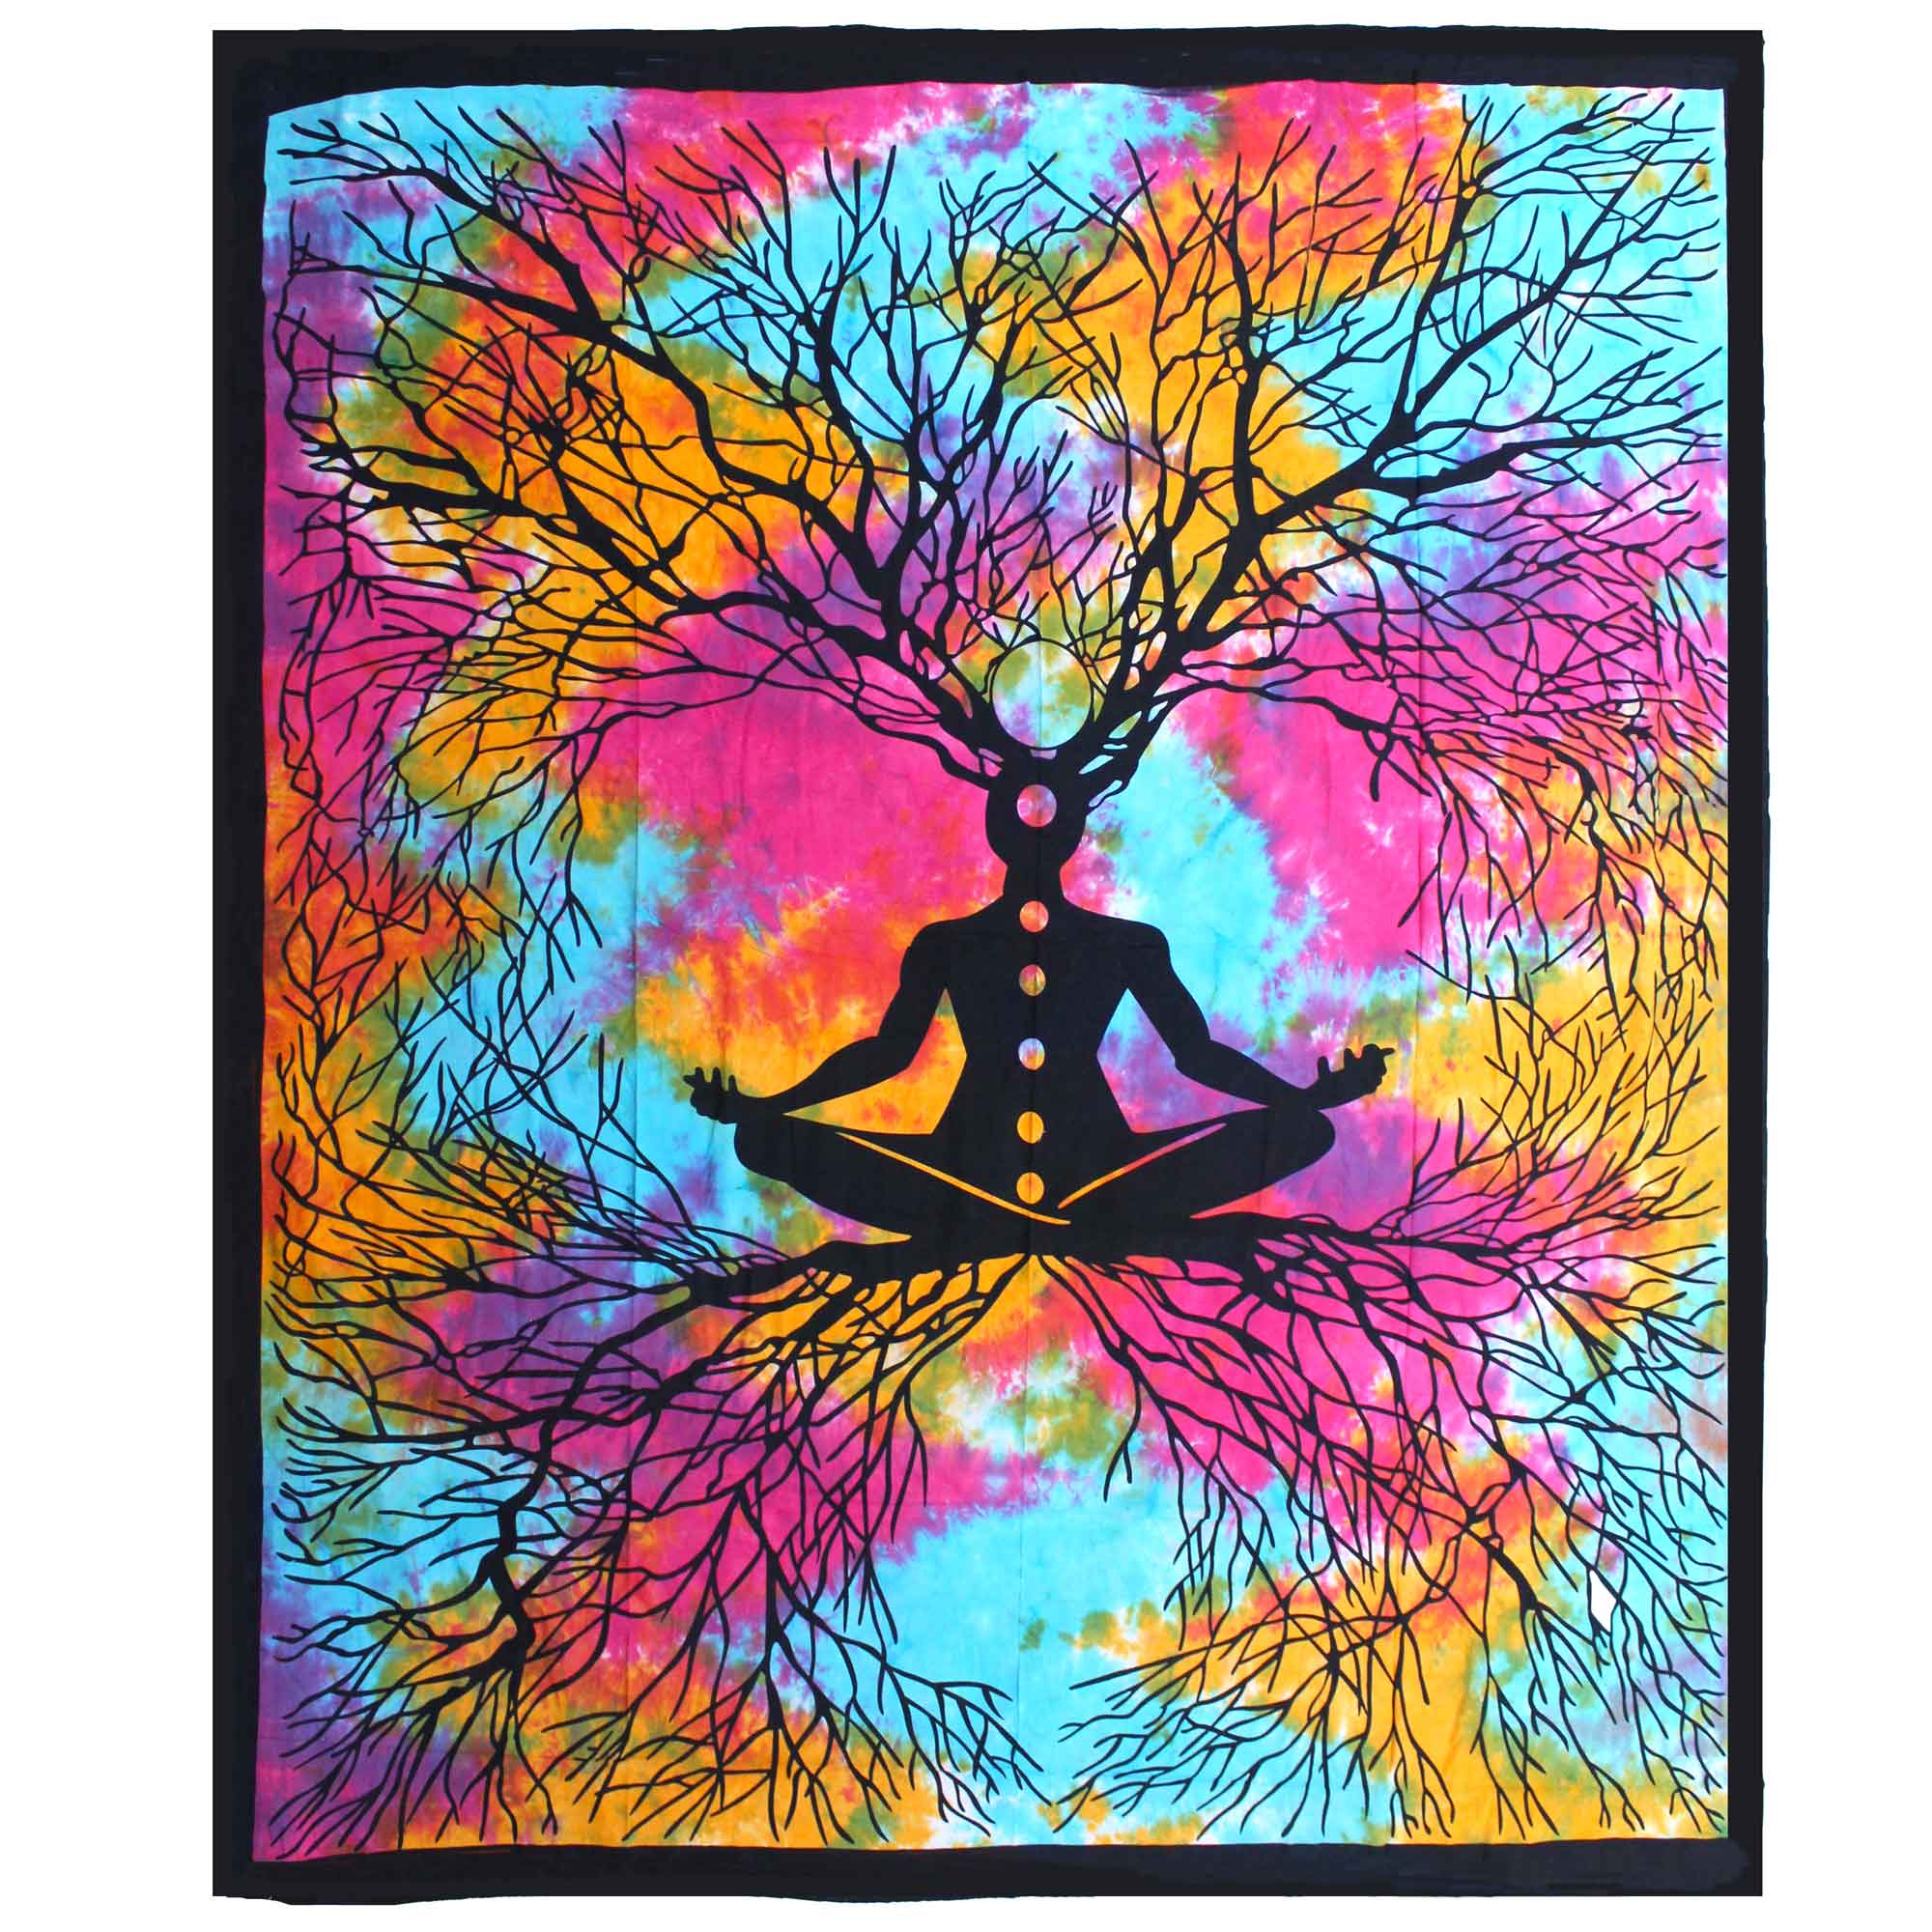 View Double Cotton Bedspread Wall Hanging Yoga Tree information